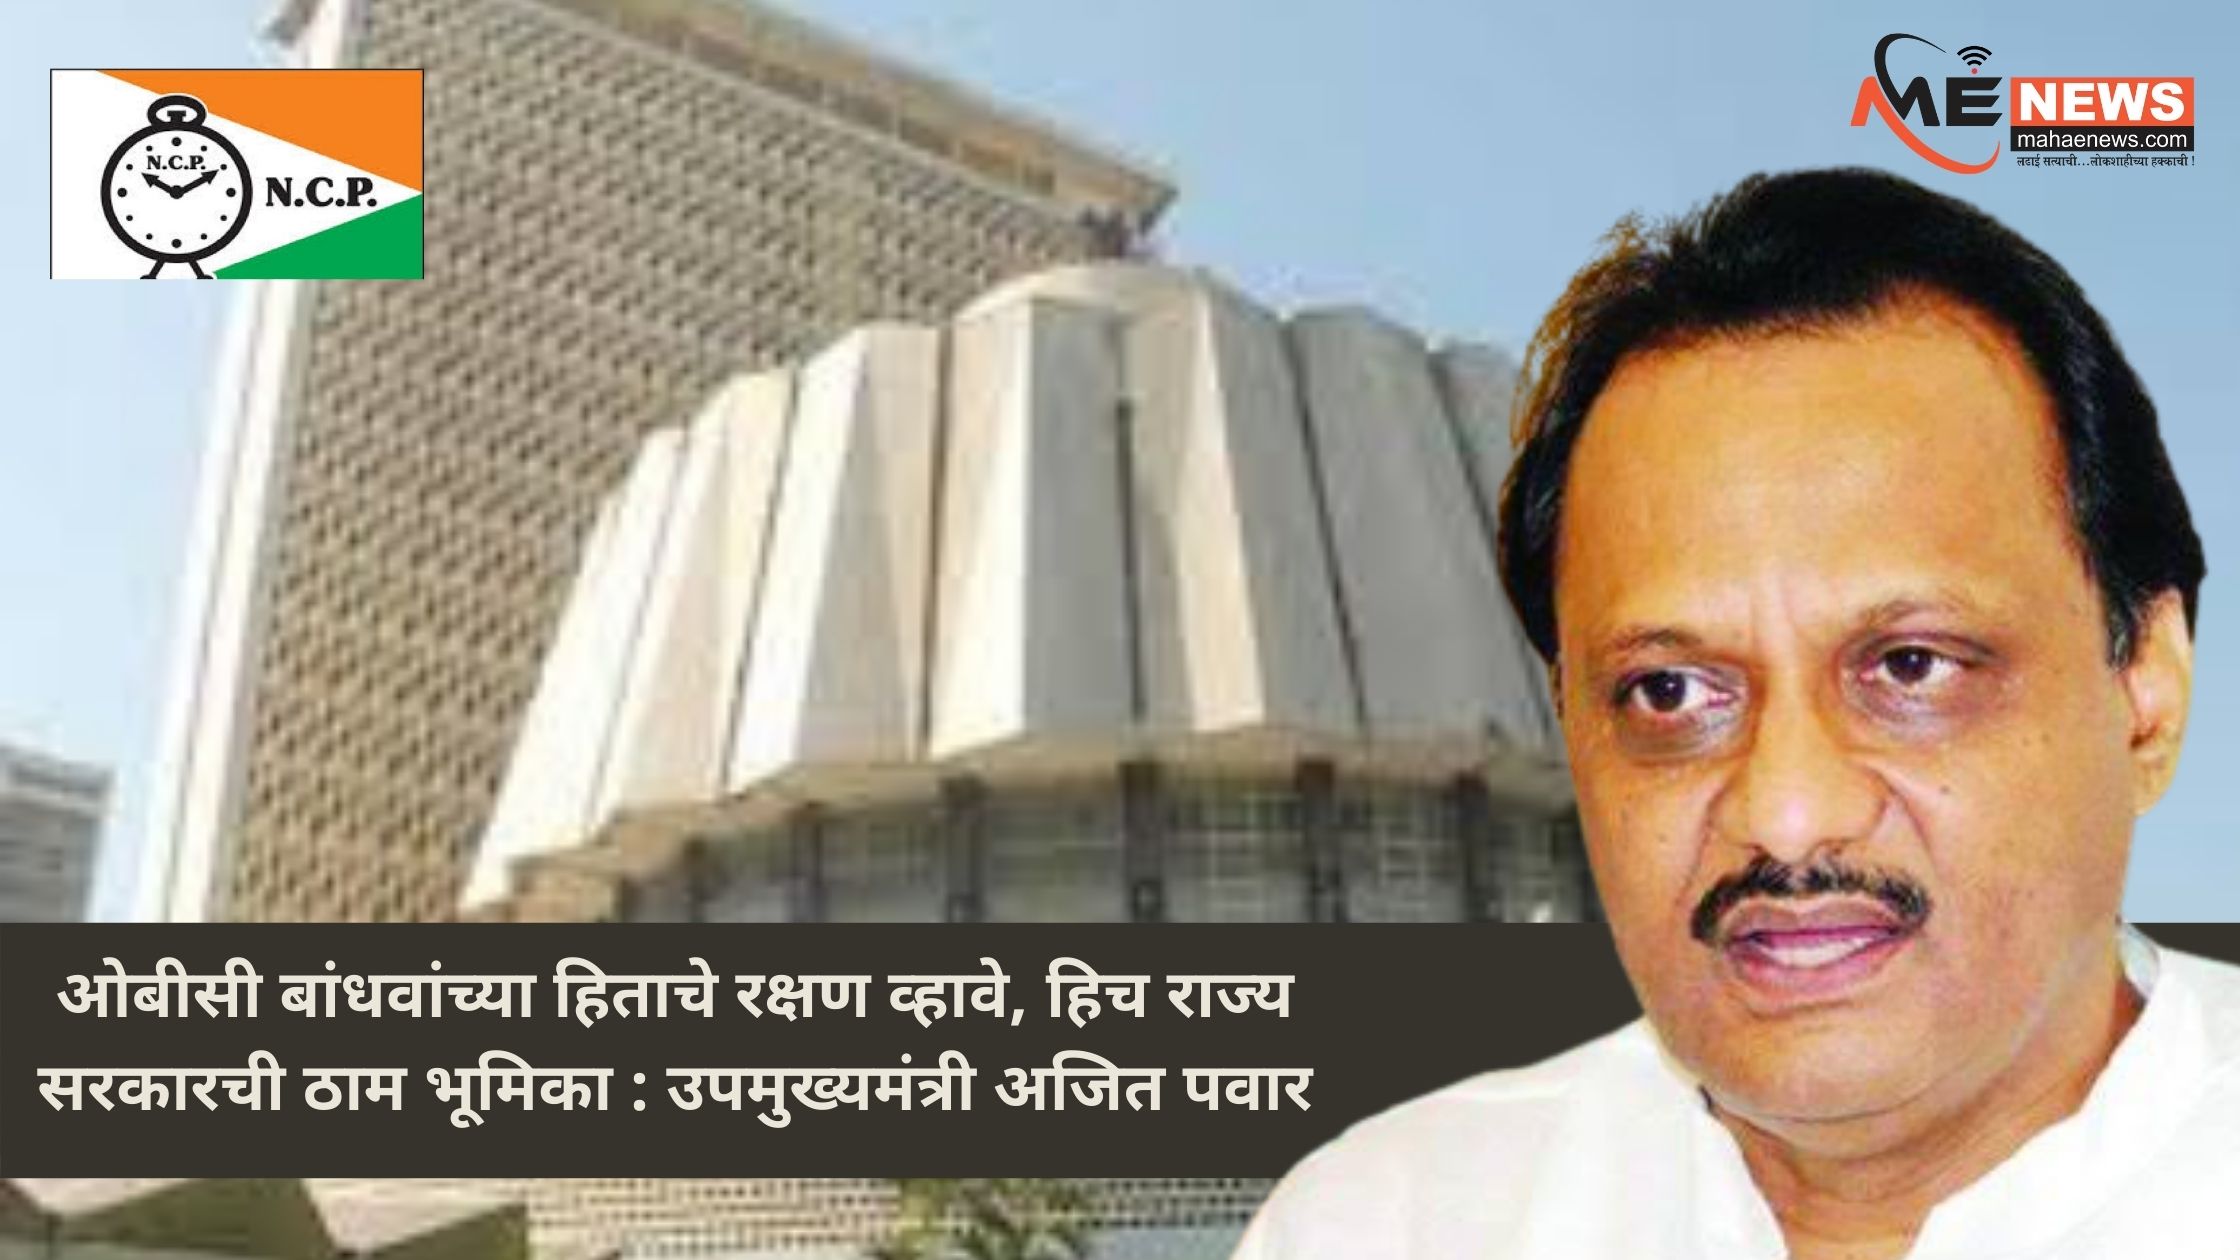 The interests of OBCs should be protected, this is the strong role of the state government: Deputy Chief Minister Ajit Pawar